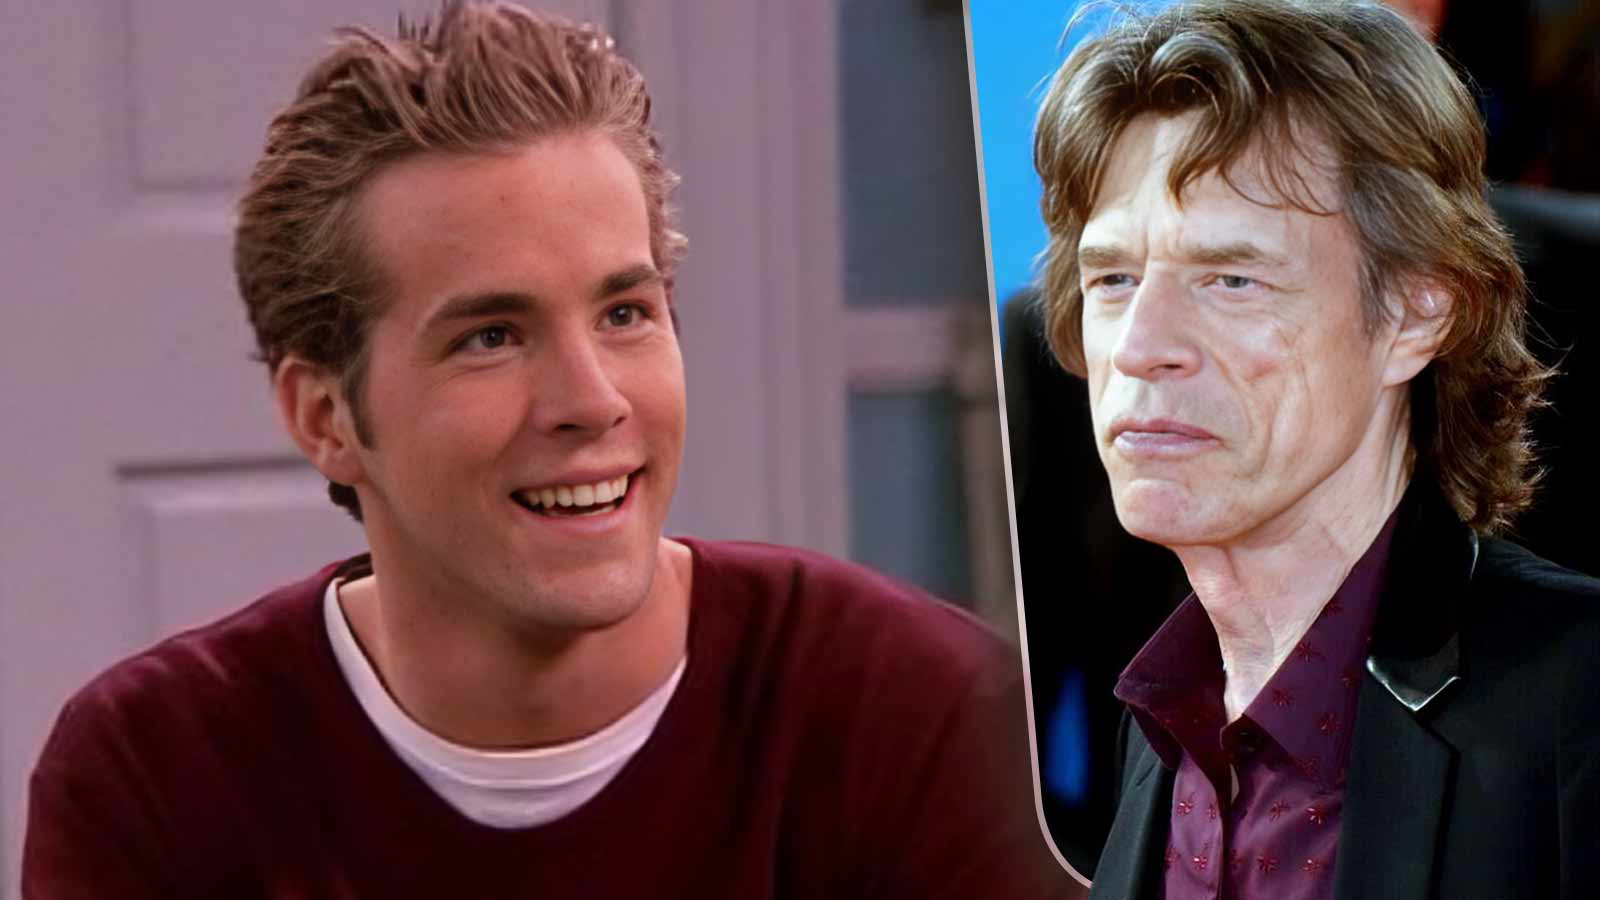 “I invaded his space”: 23-year-old Ryan Reynolds Fanboying Over Mick Jagger During His Sitcom Days Shows What a Wild Ride He’s Had in Hollywood